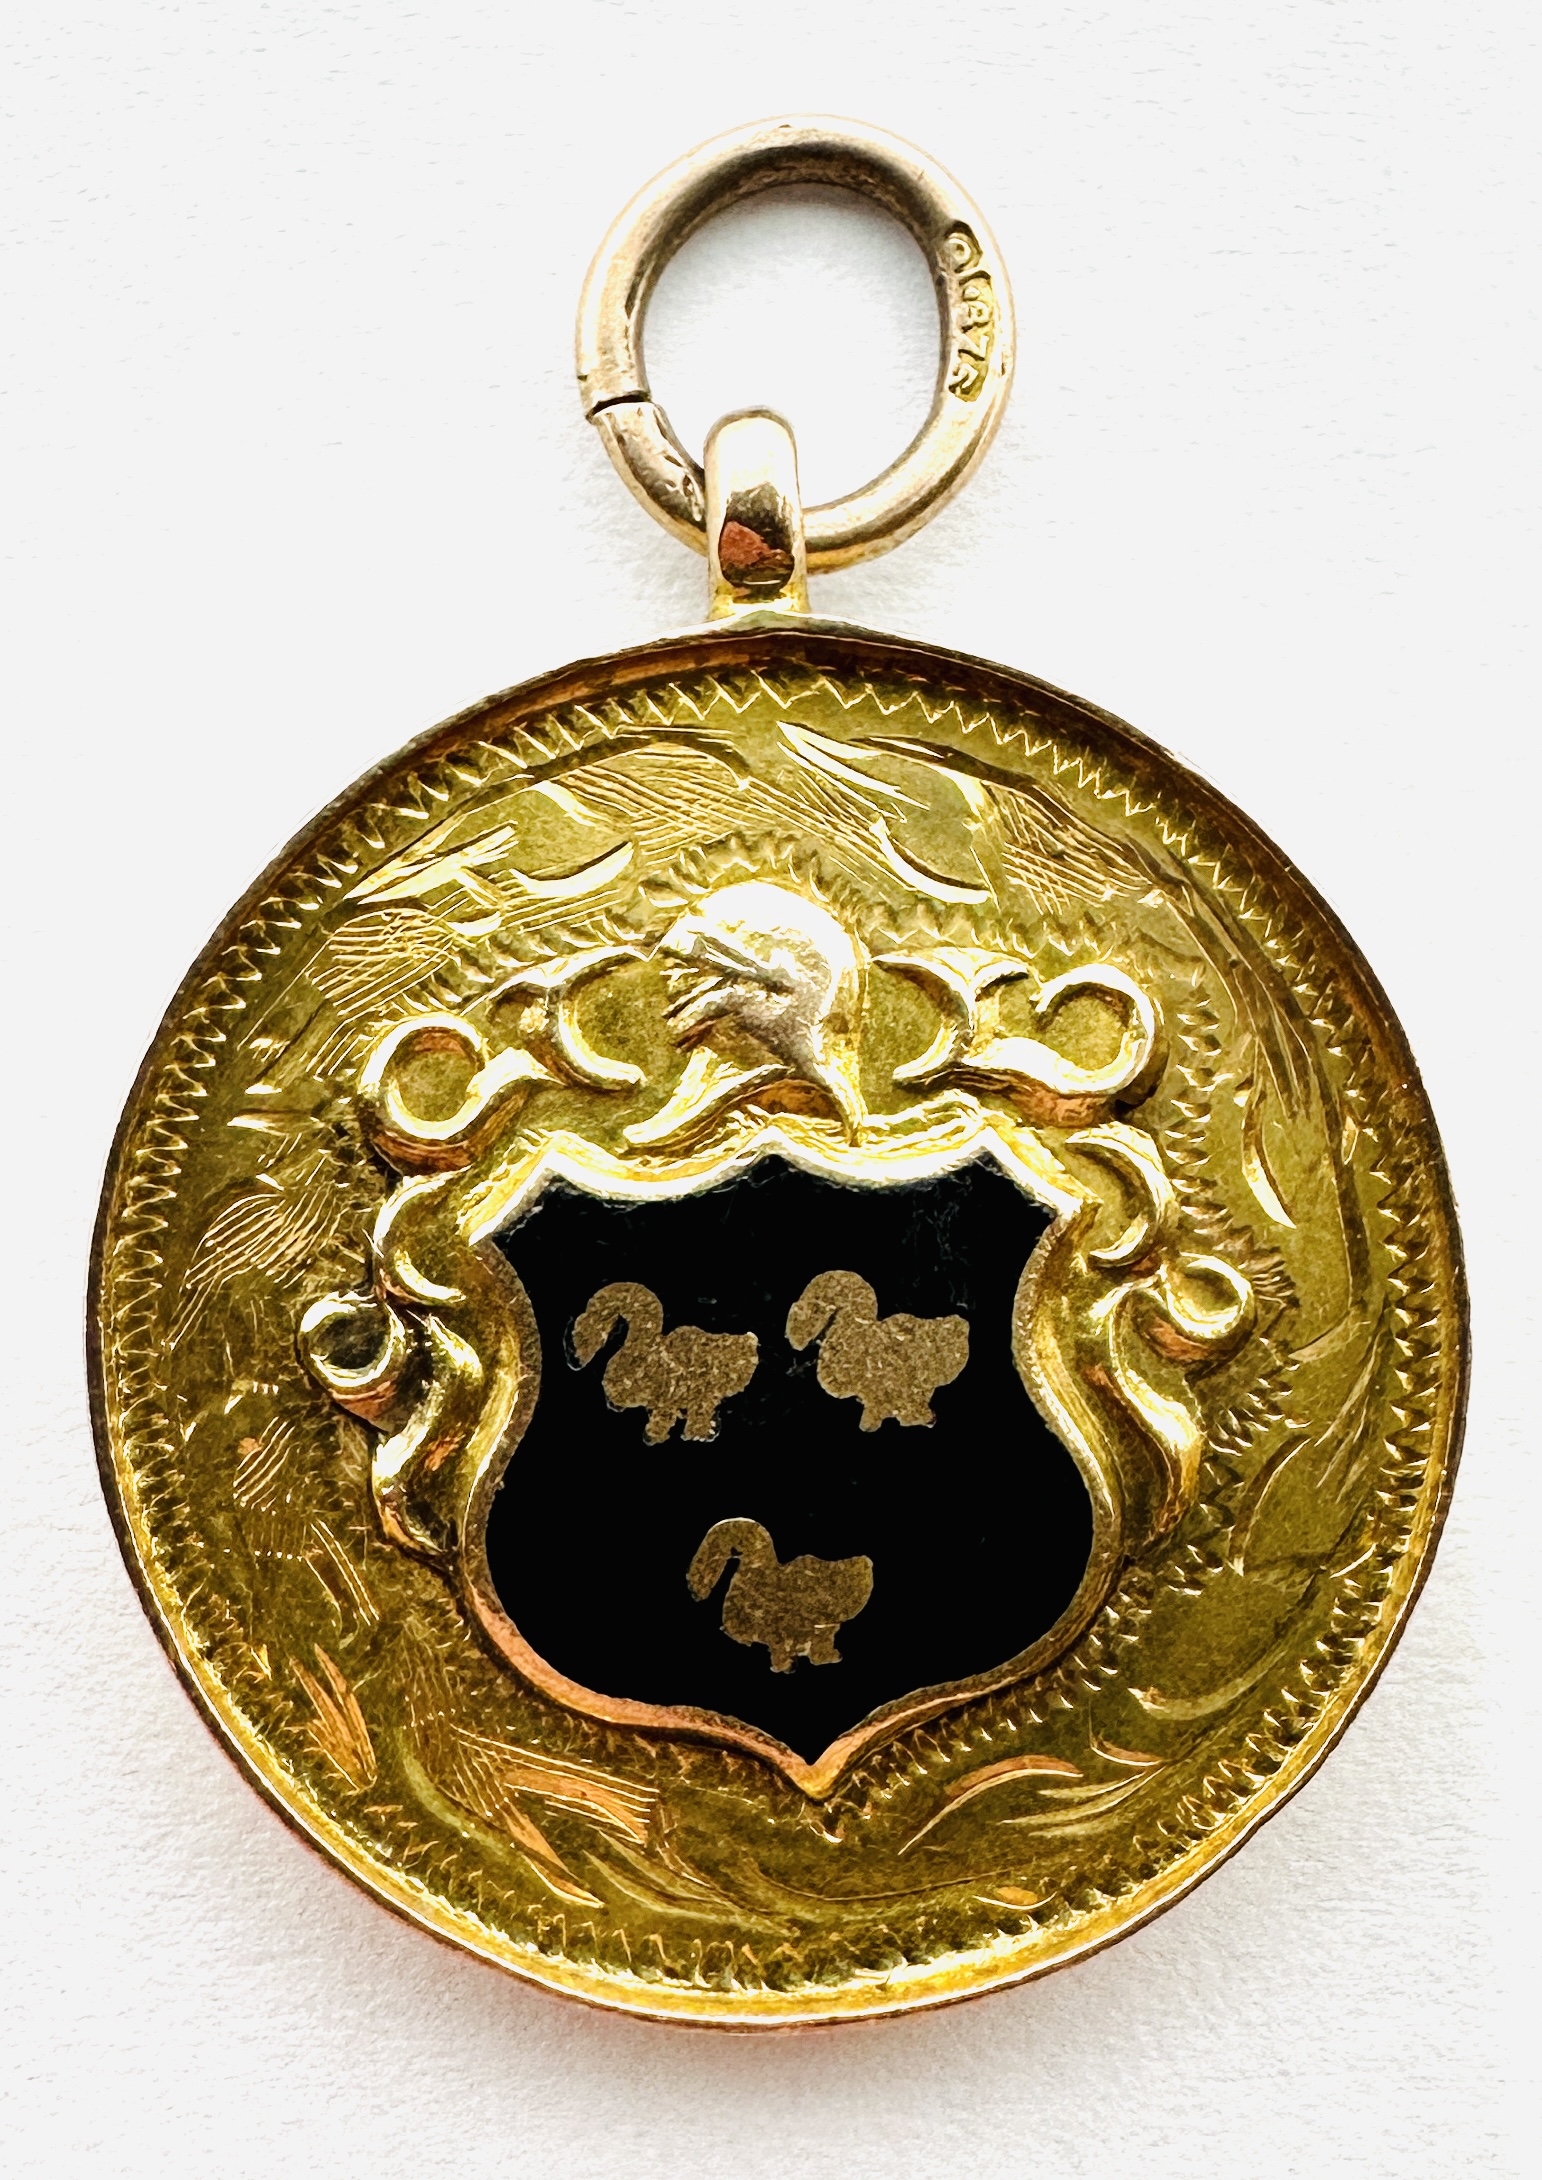 A VINTAGE 9CT GOLD AND ENAMELED MEDAL, BIRMINGHAM ASSAY D&D "SELBY HOSP. CUP RNS.